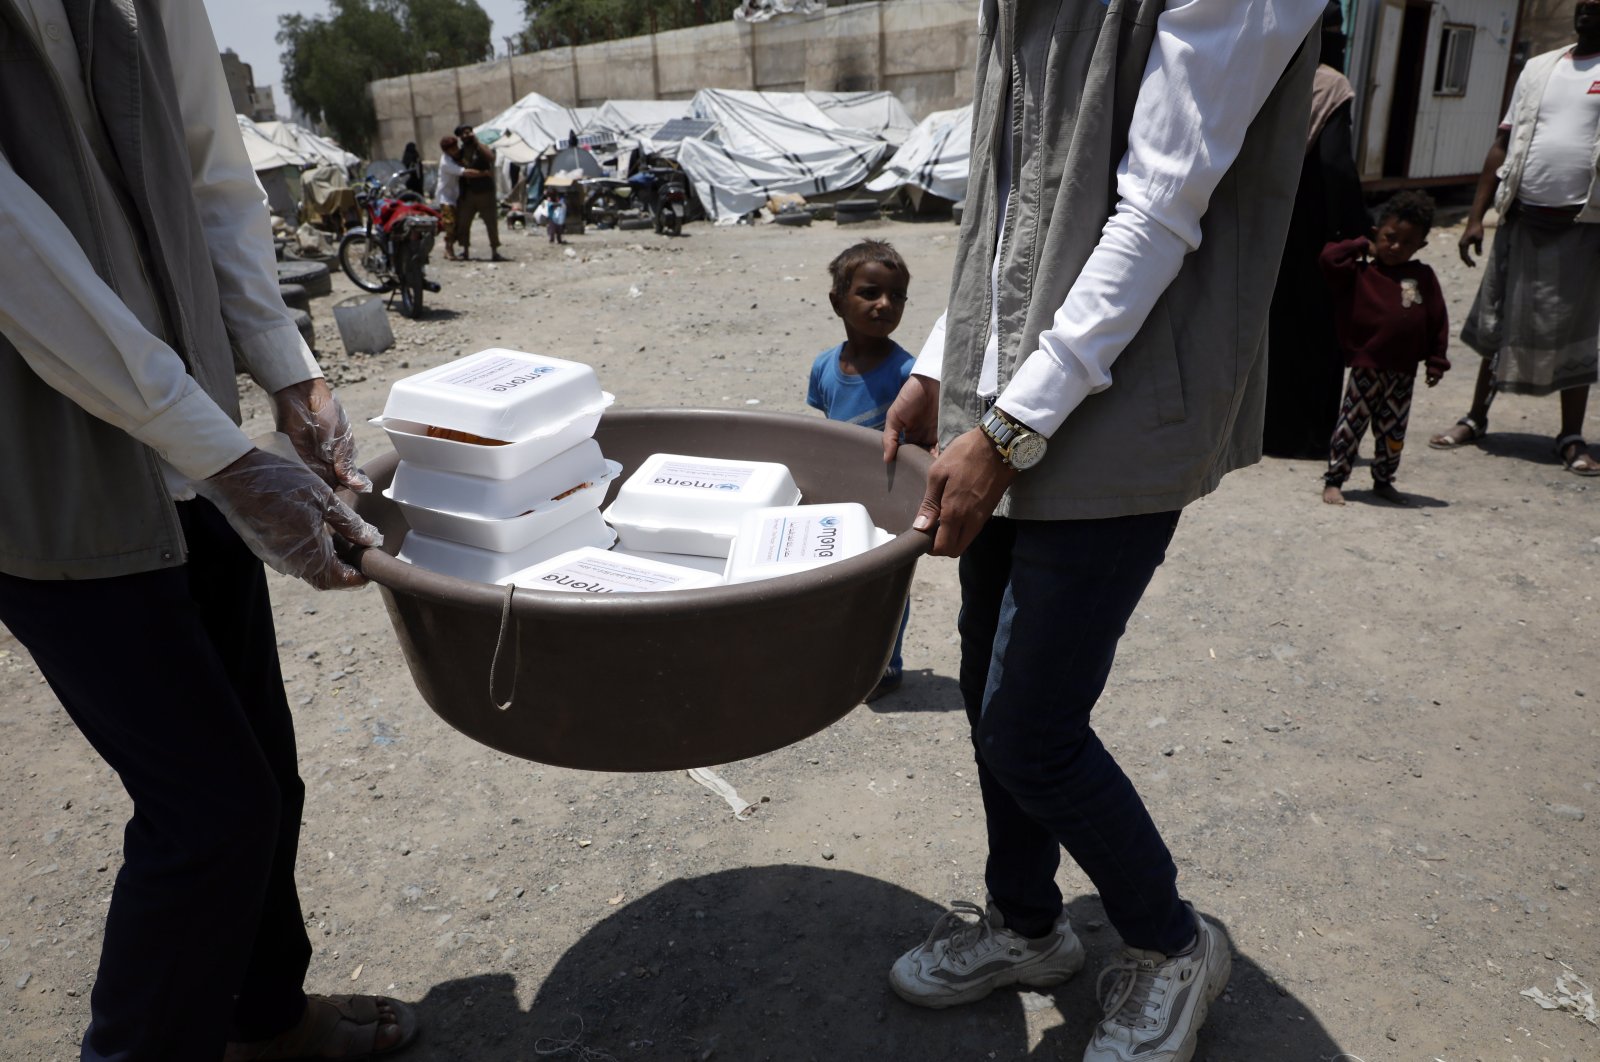 Volunteers distribute food provided by the Mona relief agency to displaced people at a makeshift camp on the International Day of Charity, in Sanaa, Yemen, Sept. 5, 2022. (EPA File Photo)